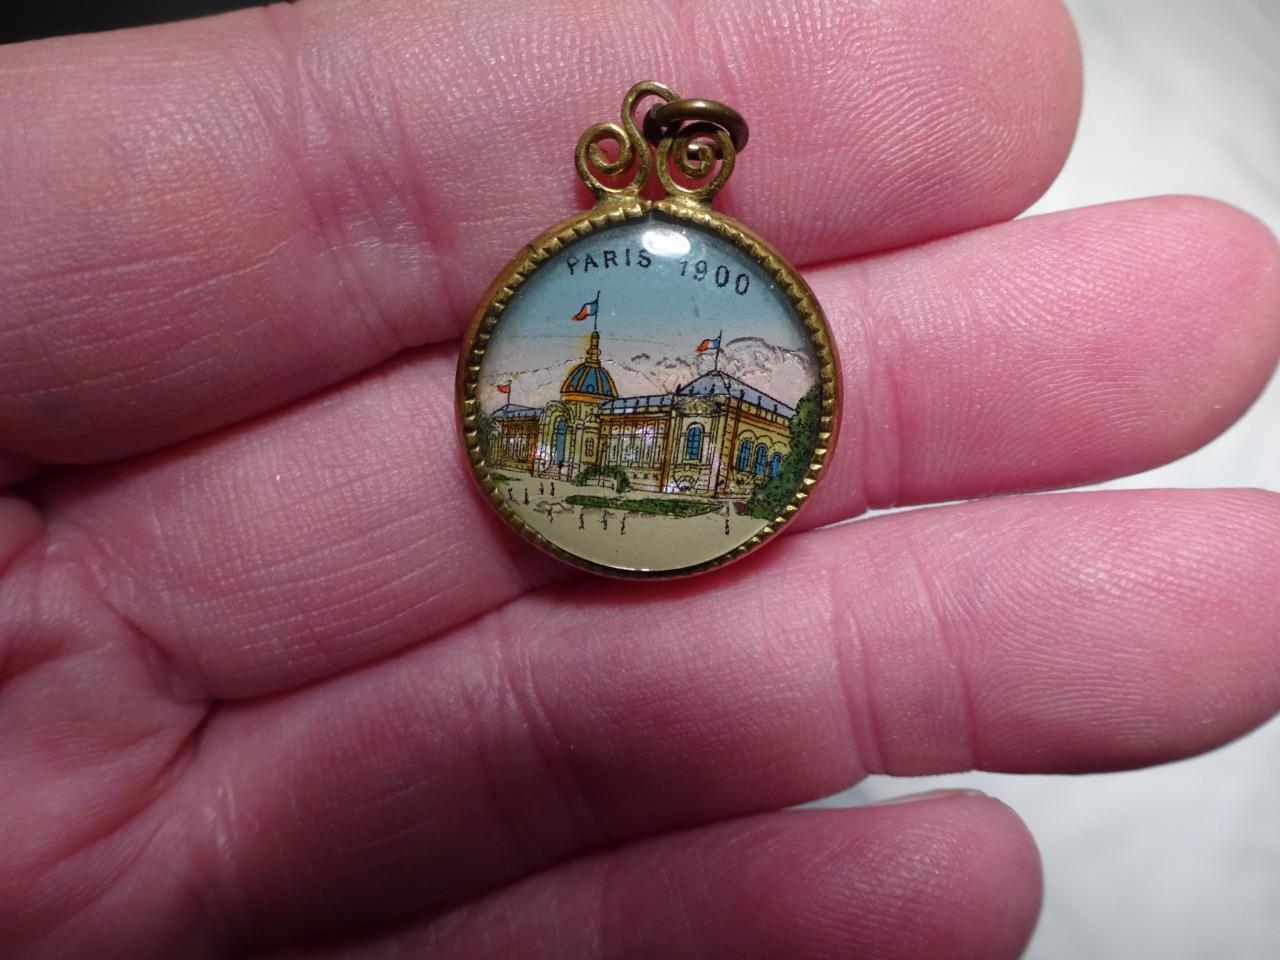 1900 PARIS EXPOSITION NECKLACE PENDANT OR WATCH FOB UNDER GLASS Nice